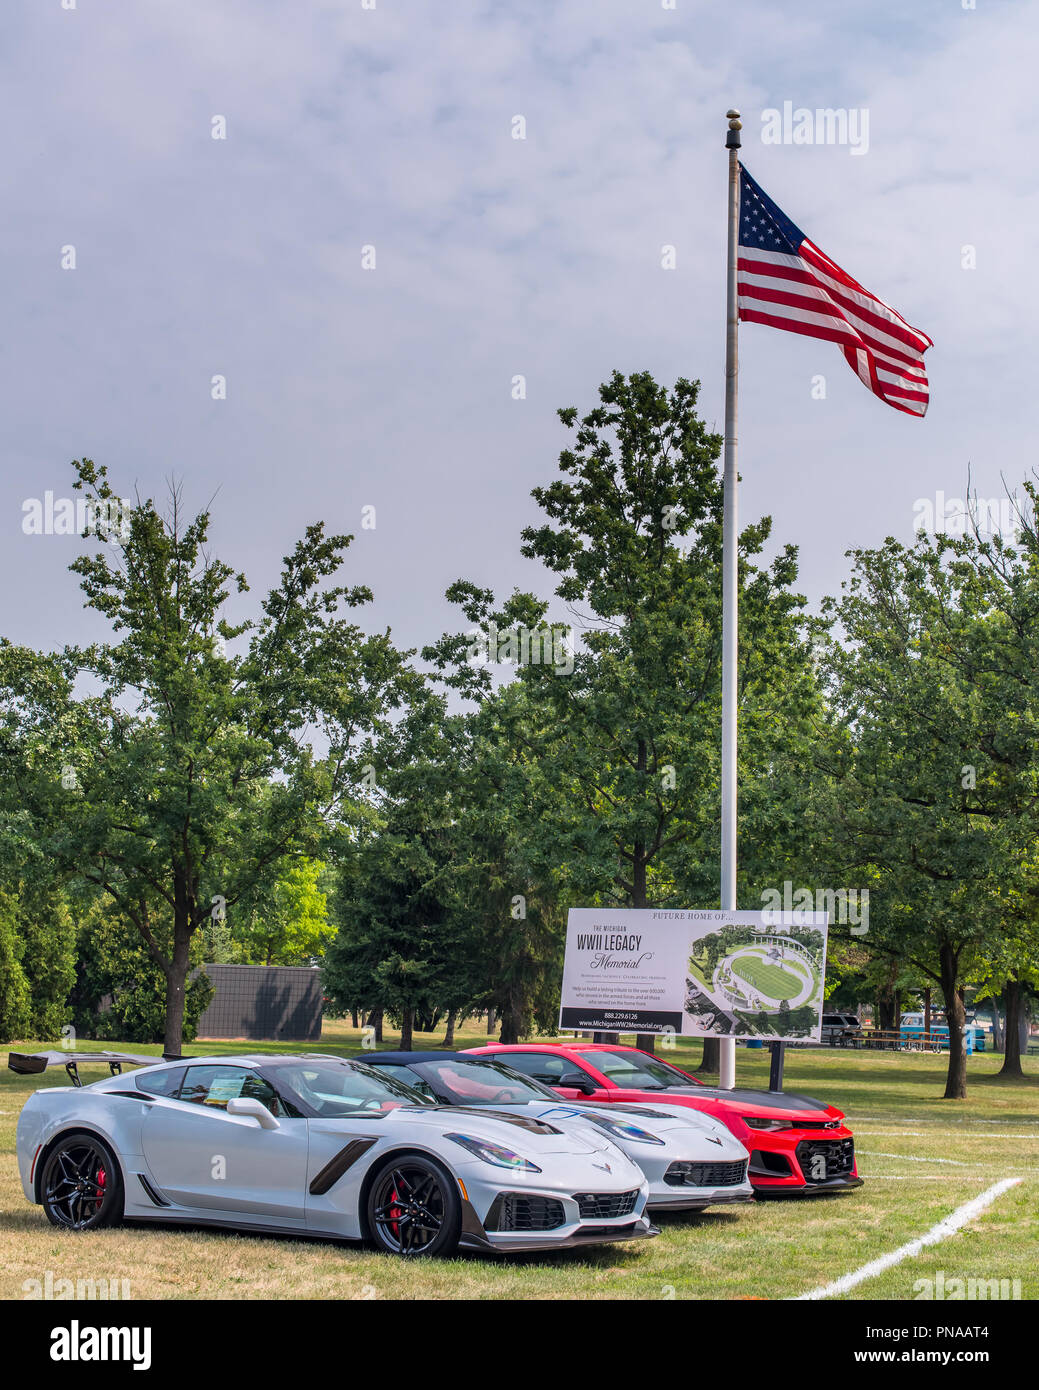 ROYAL OAK, MI/USA - AUGUST 16, 2018: Three sports cars at Memorial Park, at the Woodward Dream Cruise: Chevrolet Corvette ZR1 and Z06 Chevrolet Camaro Stock Photo